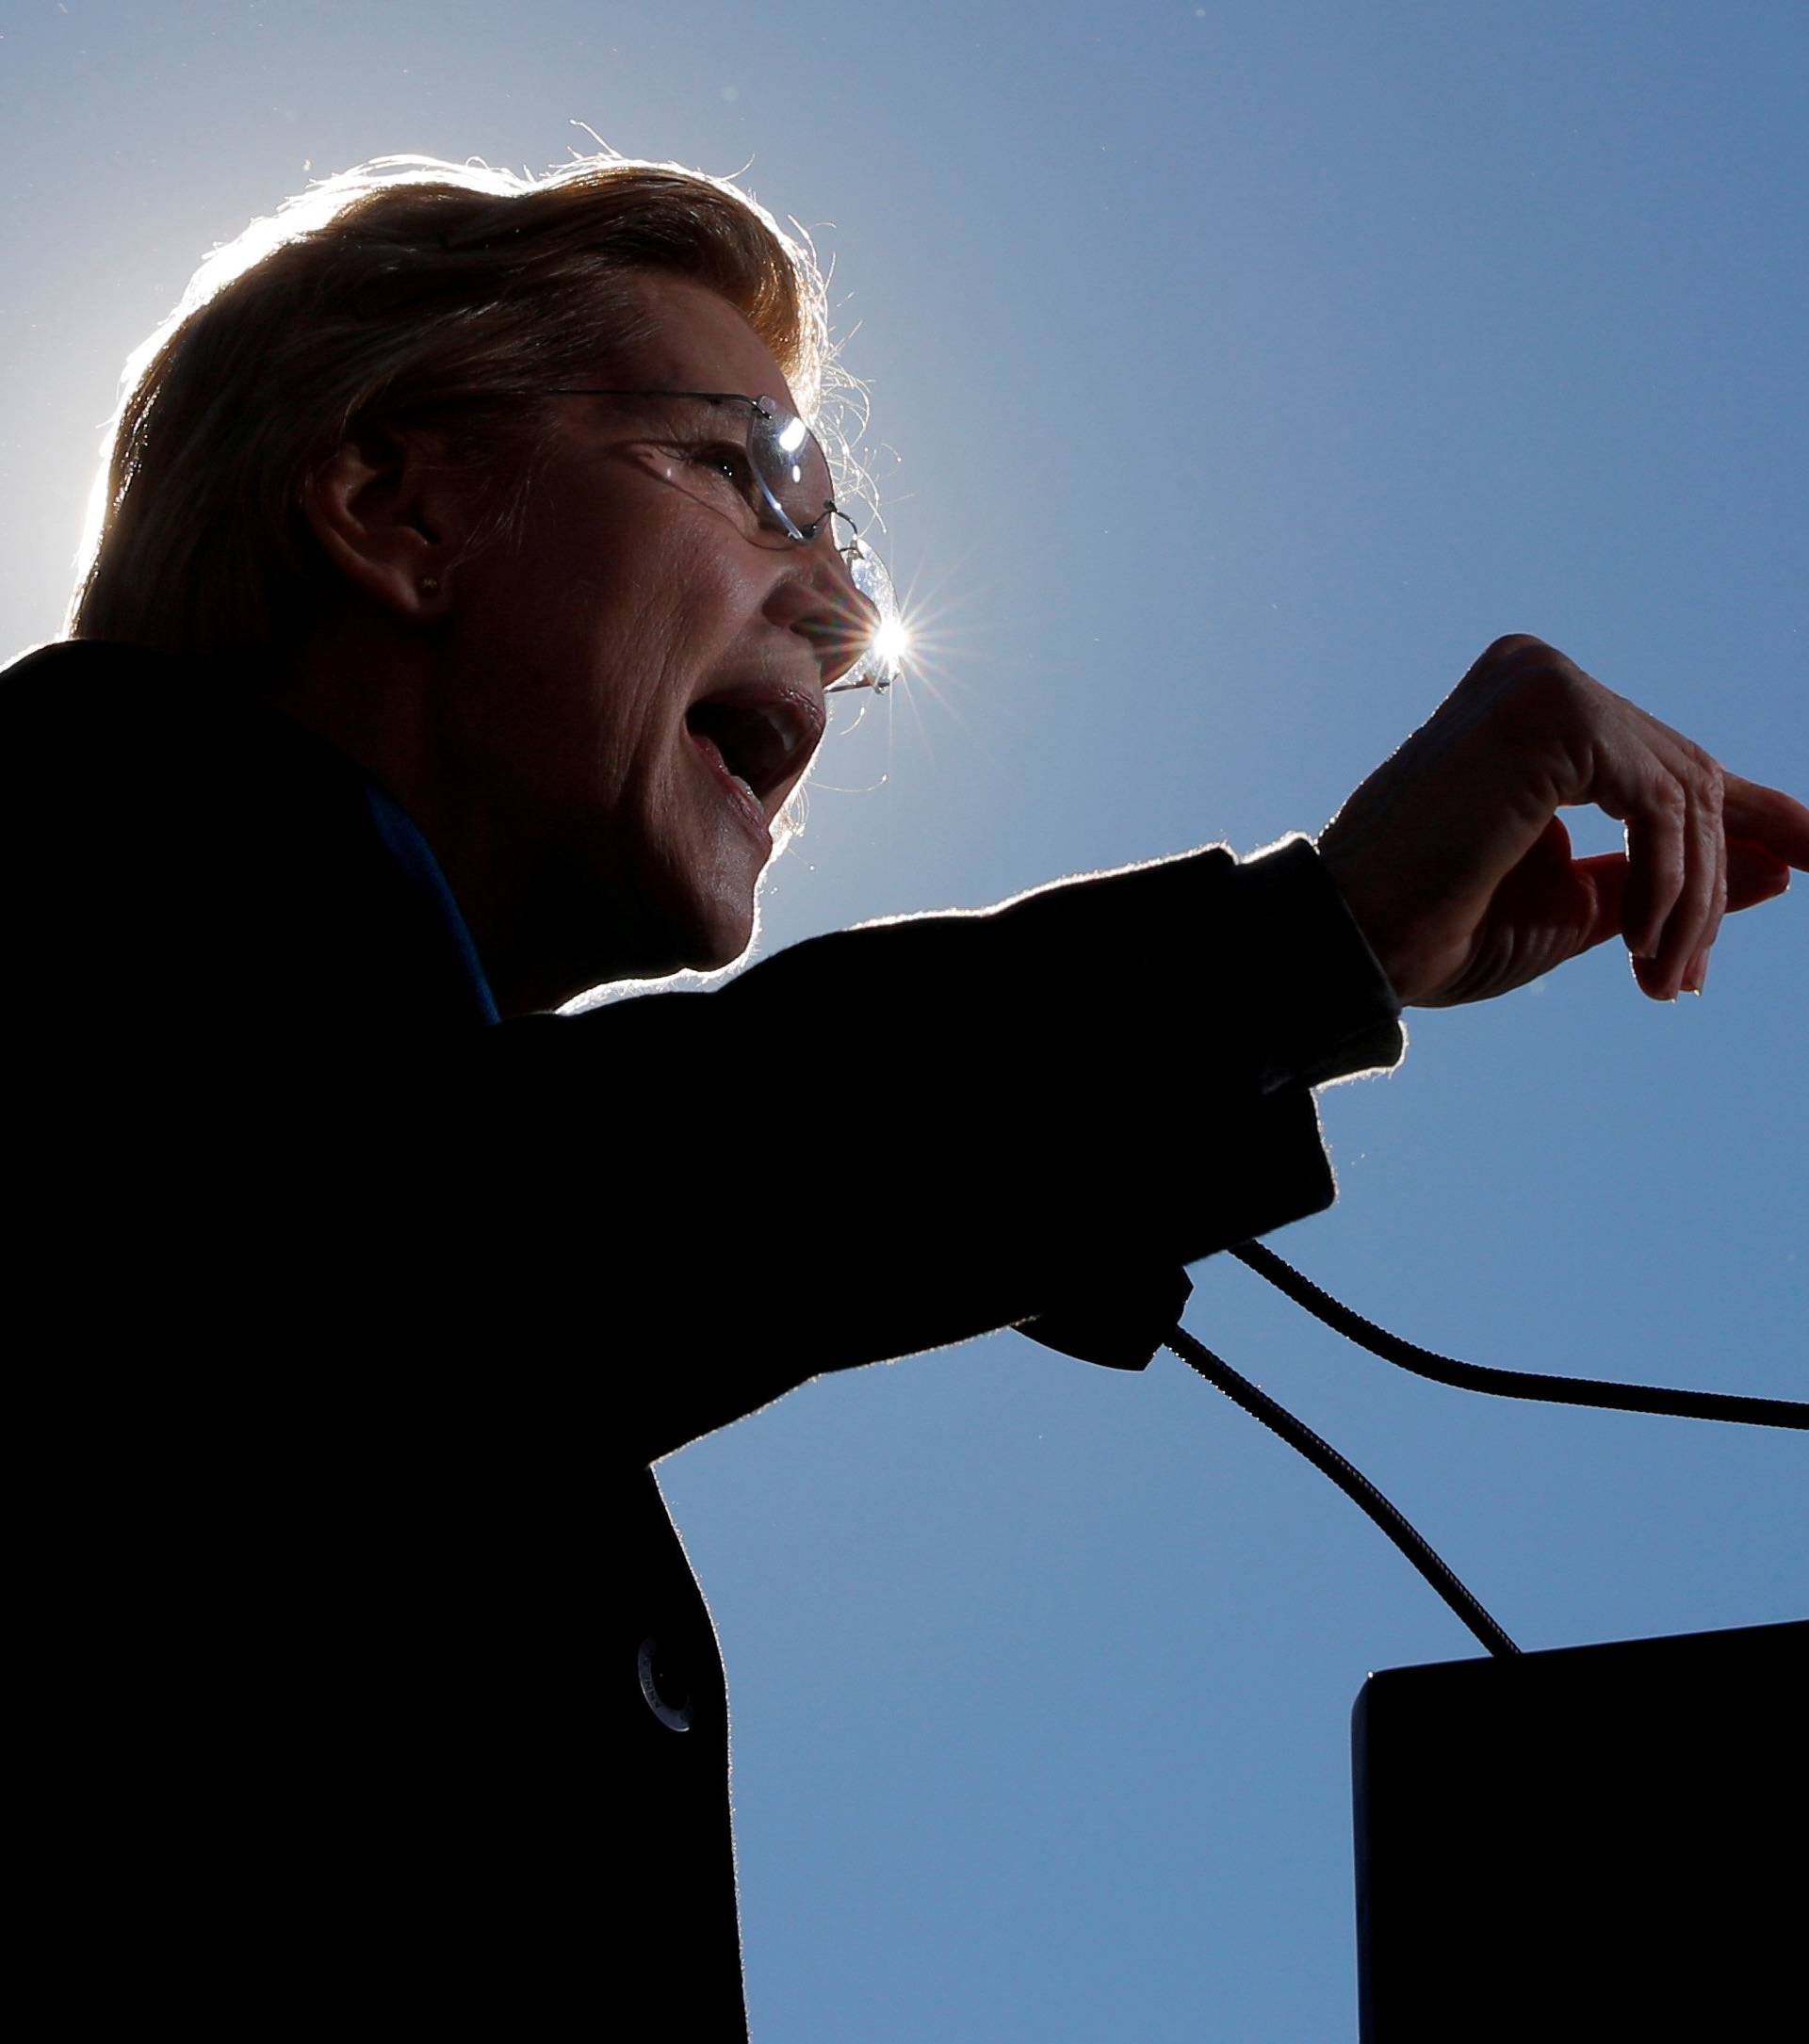 U.S. Senator Elizabeth Warren speaks at a rally to launch her campaign for the 2020 Democratic presidential nomination in Lawrence